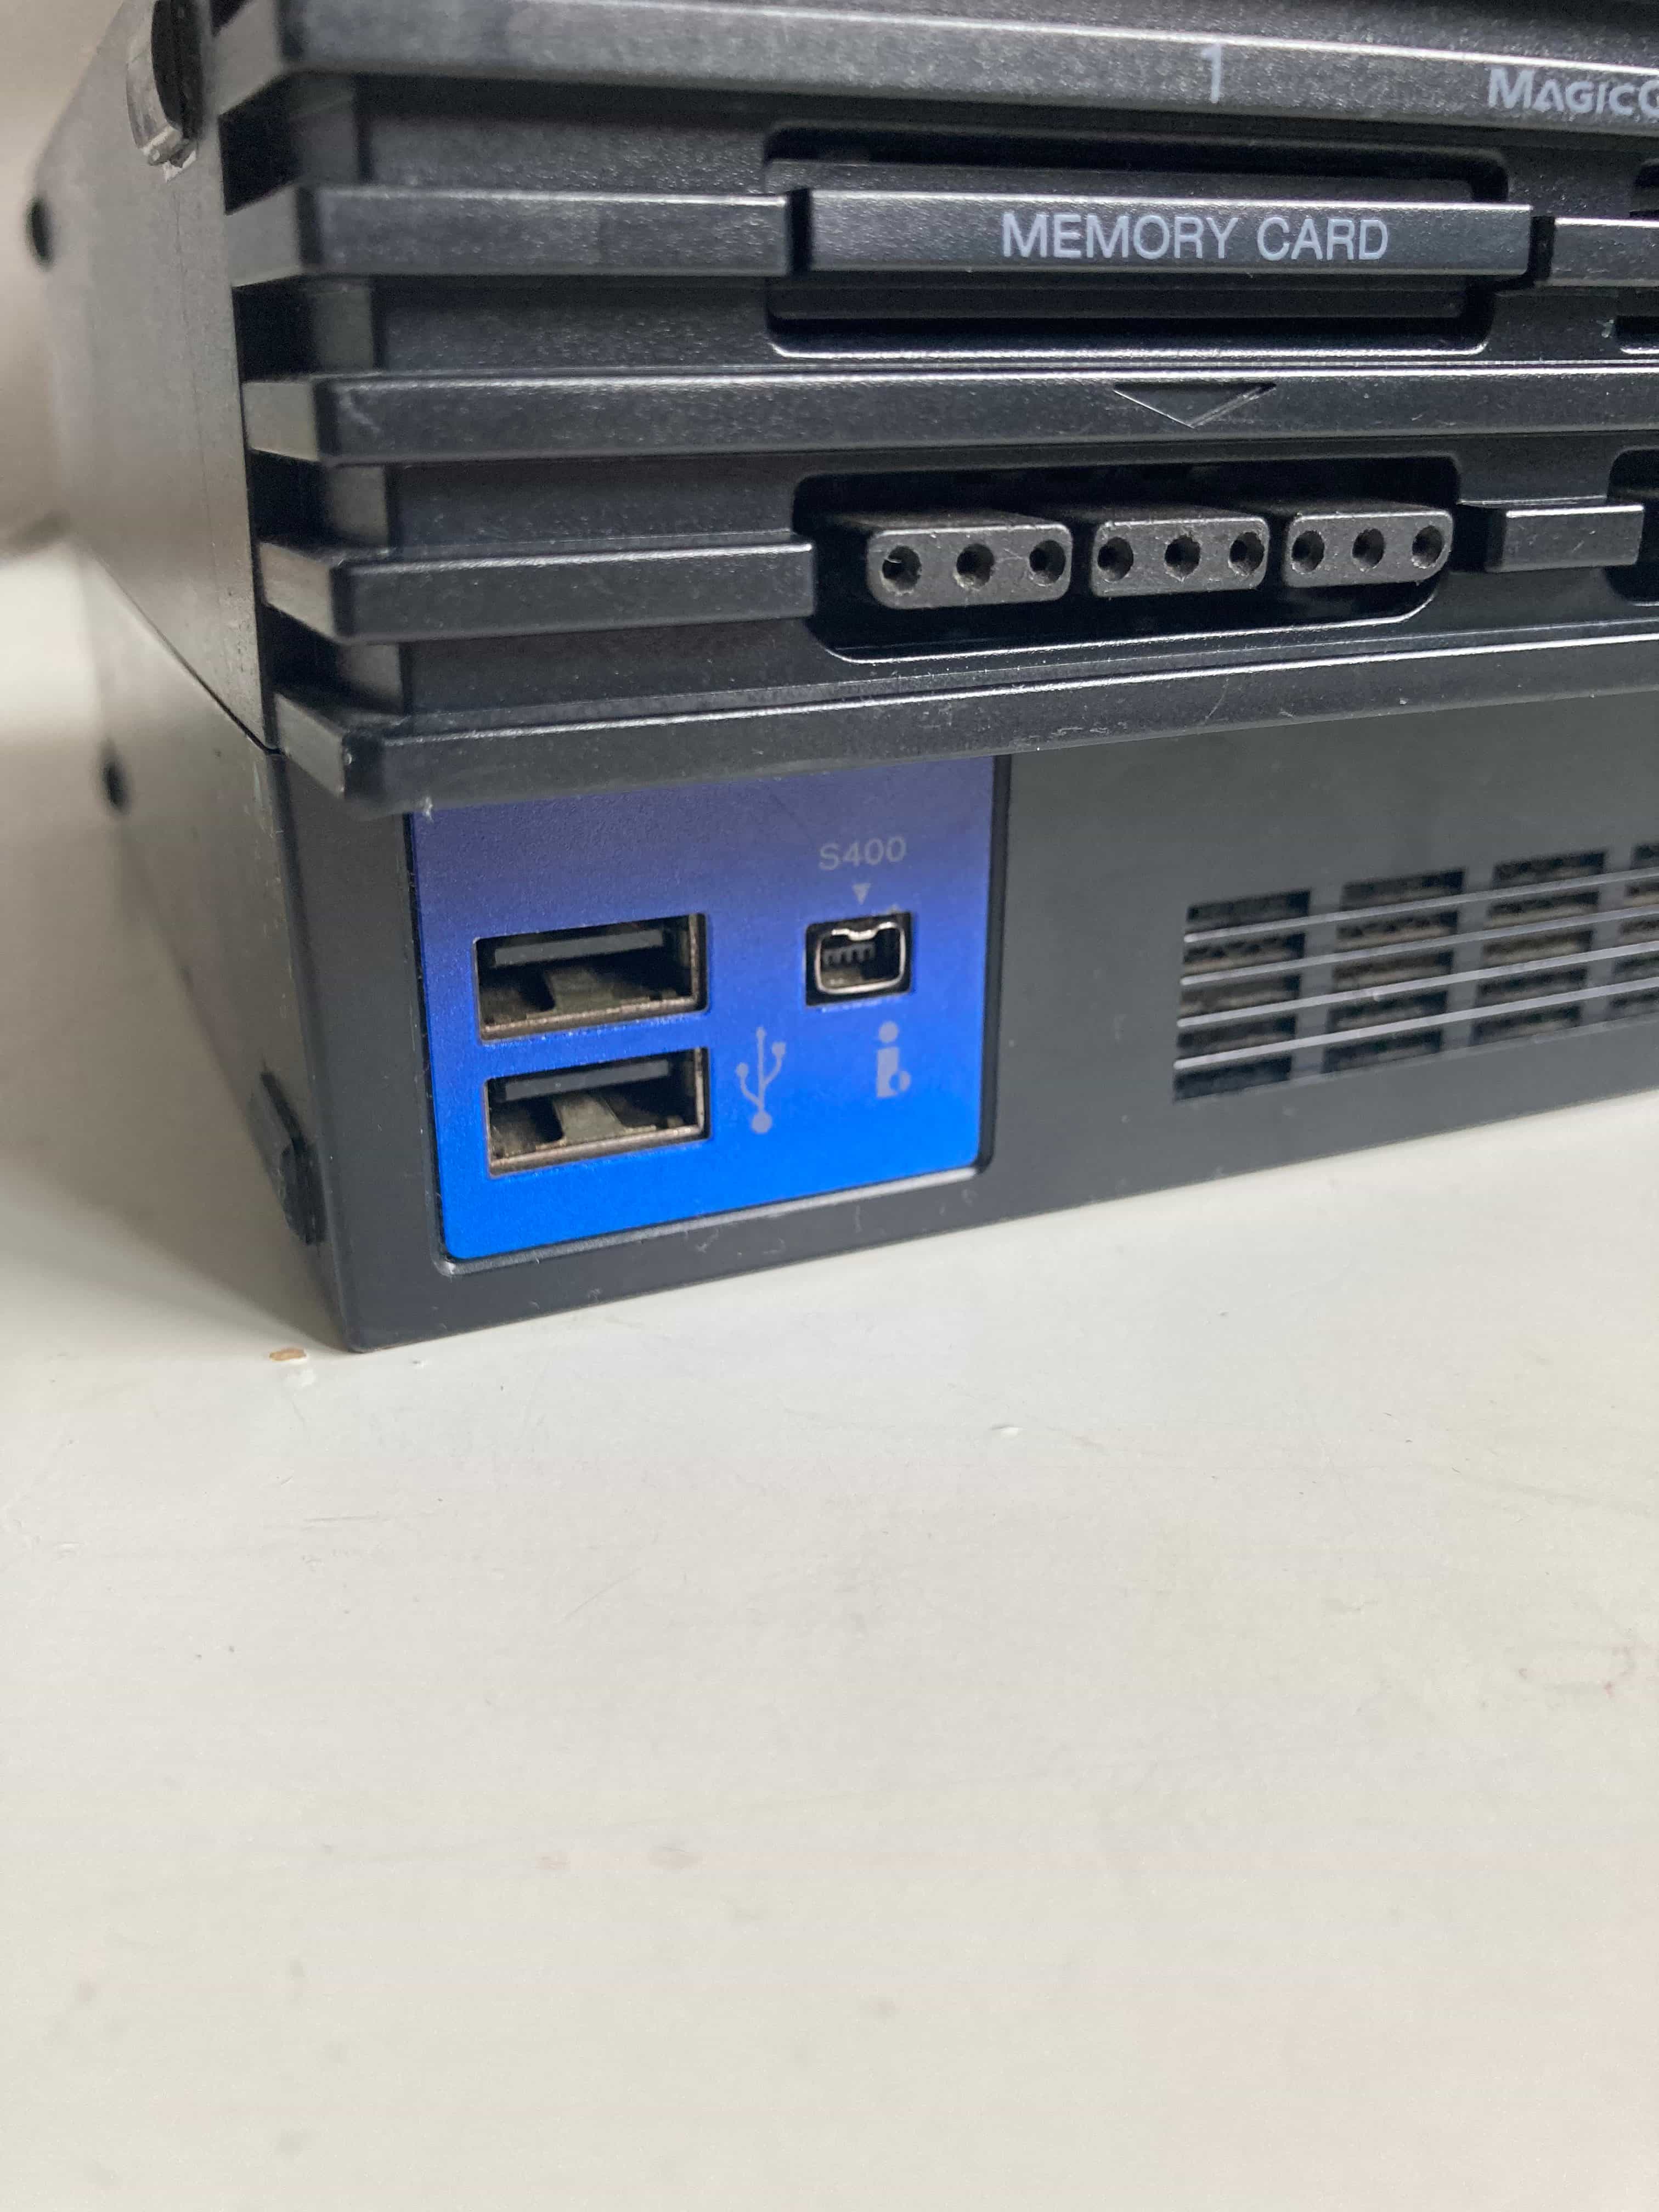 USB and FW400 ports